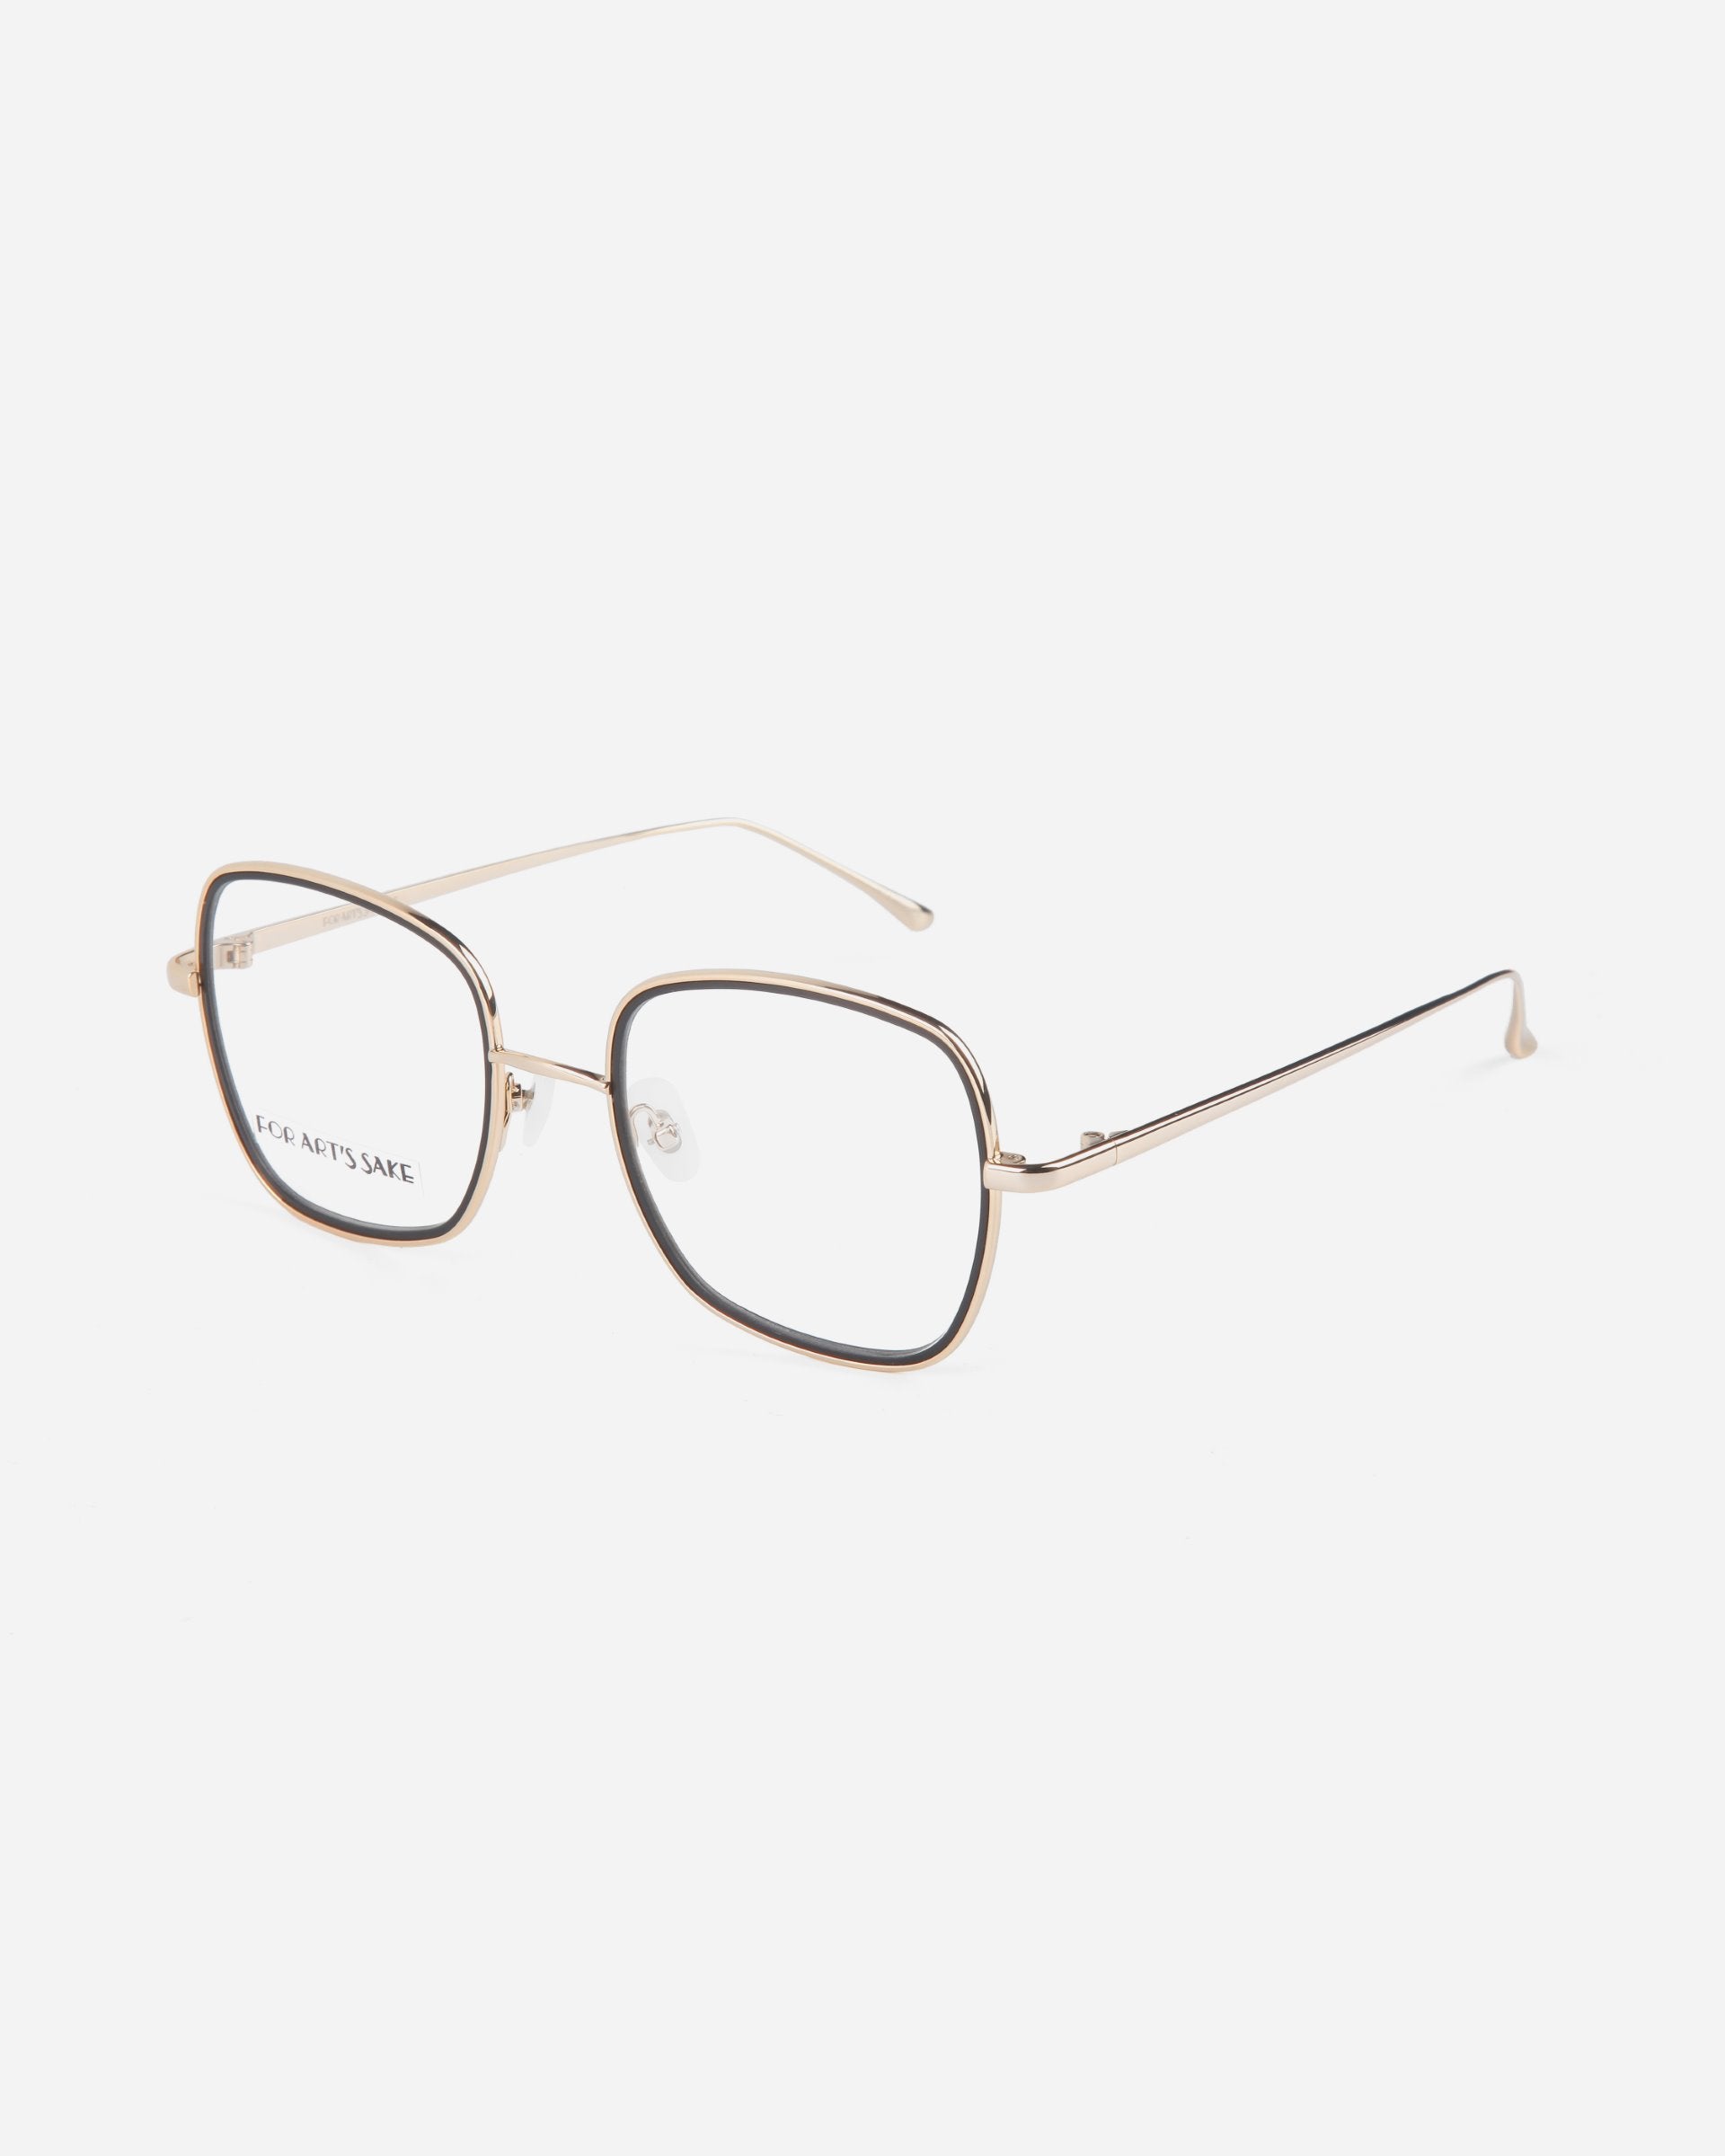 A pair of gold-rimmed, square eyeglasses with thin metal temples, transparent nose pads, and ultra-lightweight lenses featuring a blue light filter. The glasses are set against a plain white background. These are the Coconut by For Art&#39;s Sake®.